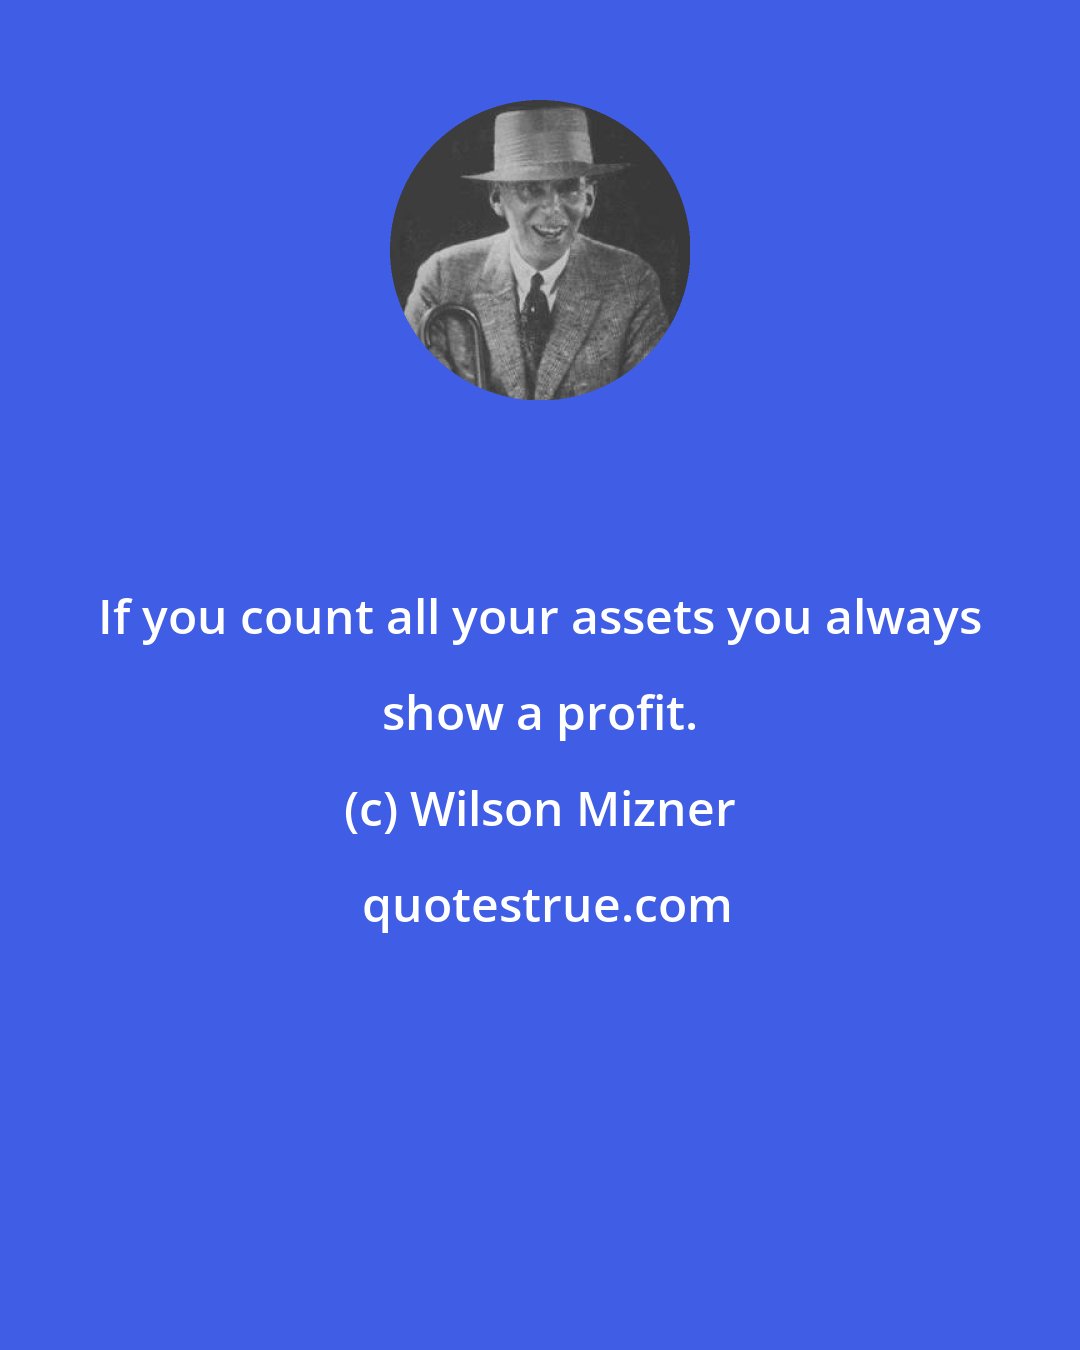 Wilson Mizner: If you count all your assets you always show a profit.